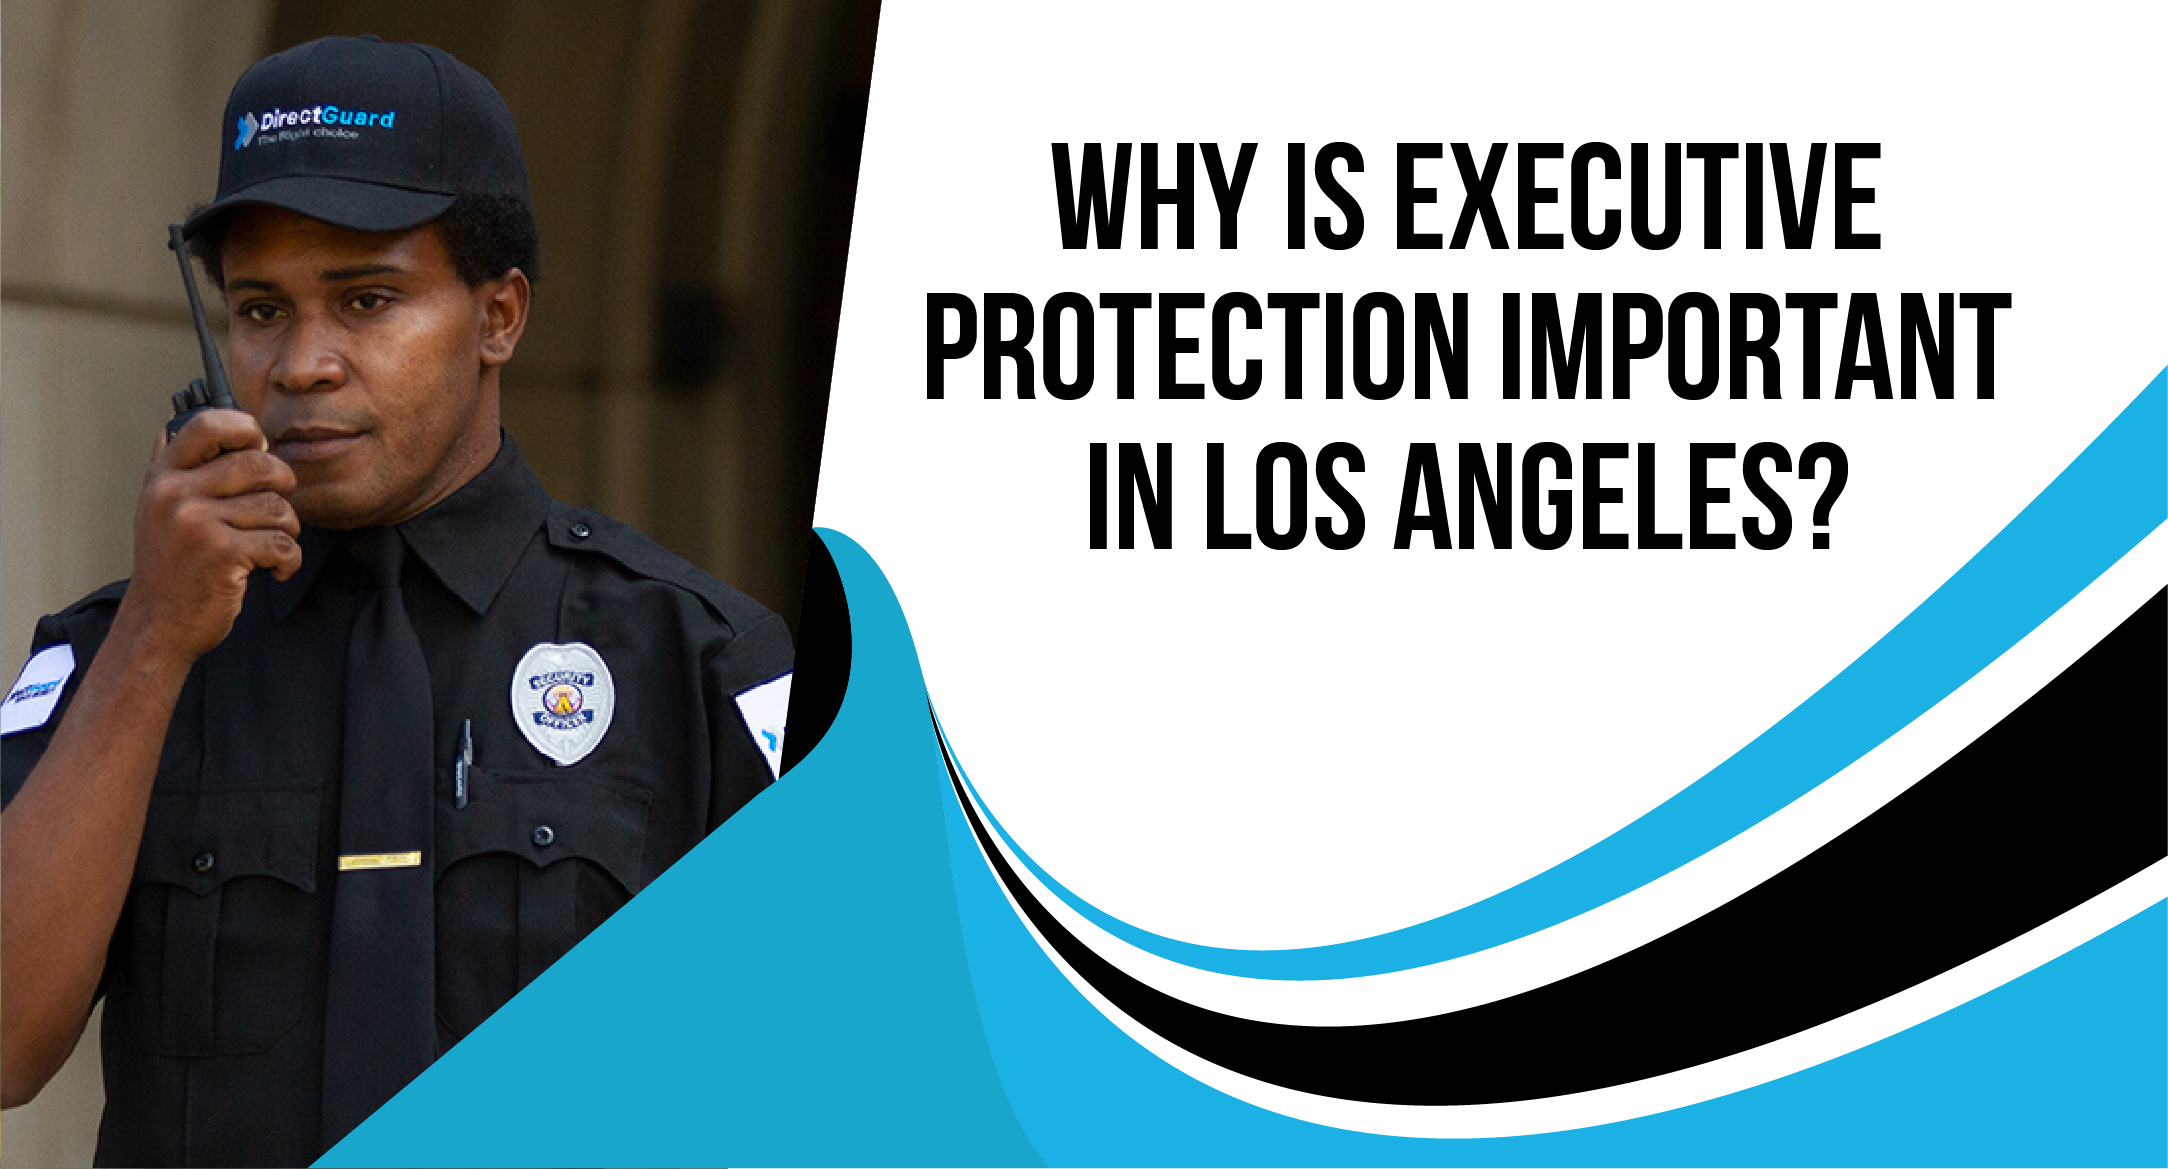 Why is executive protection important in Los Angeles